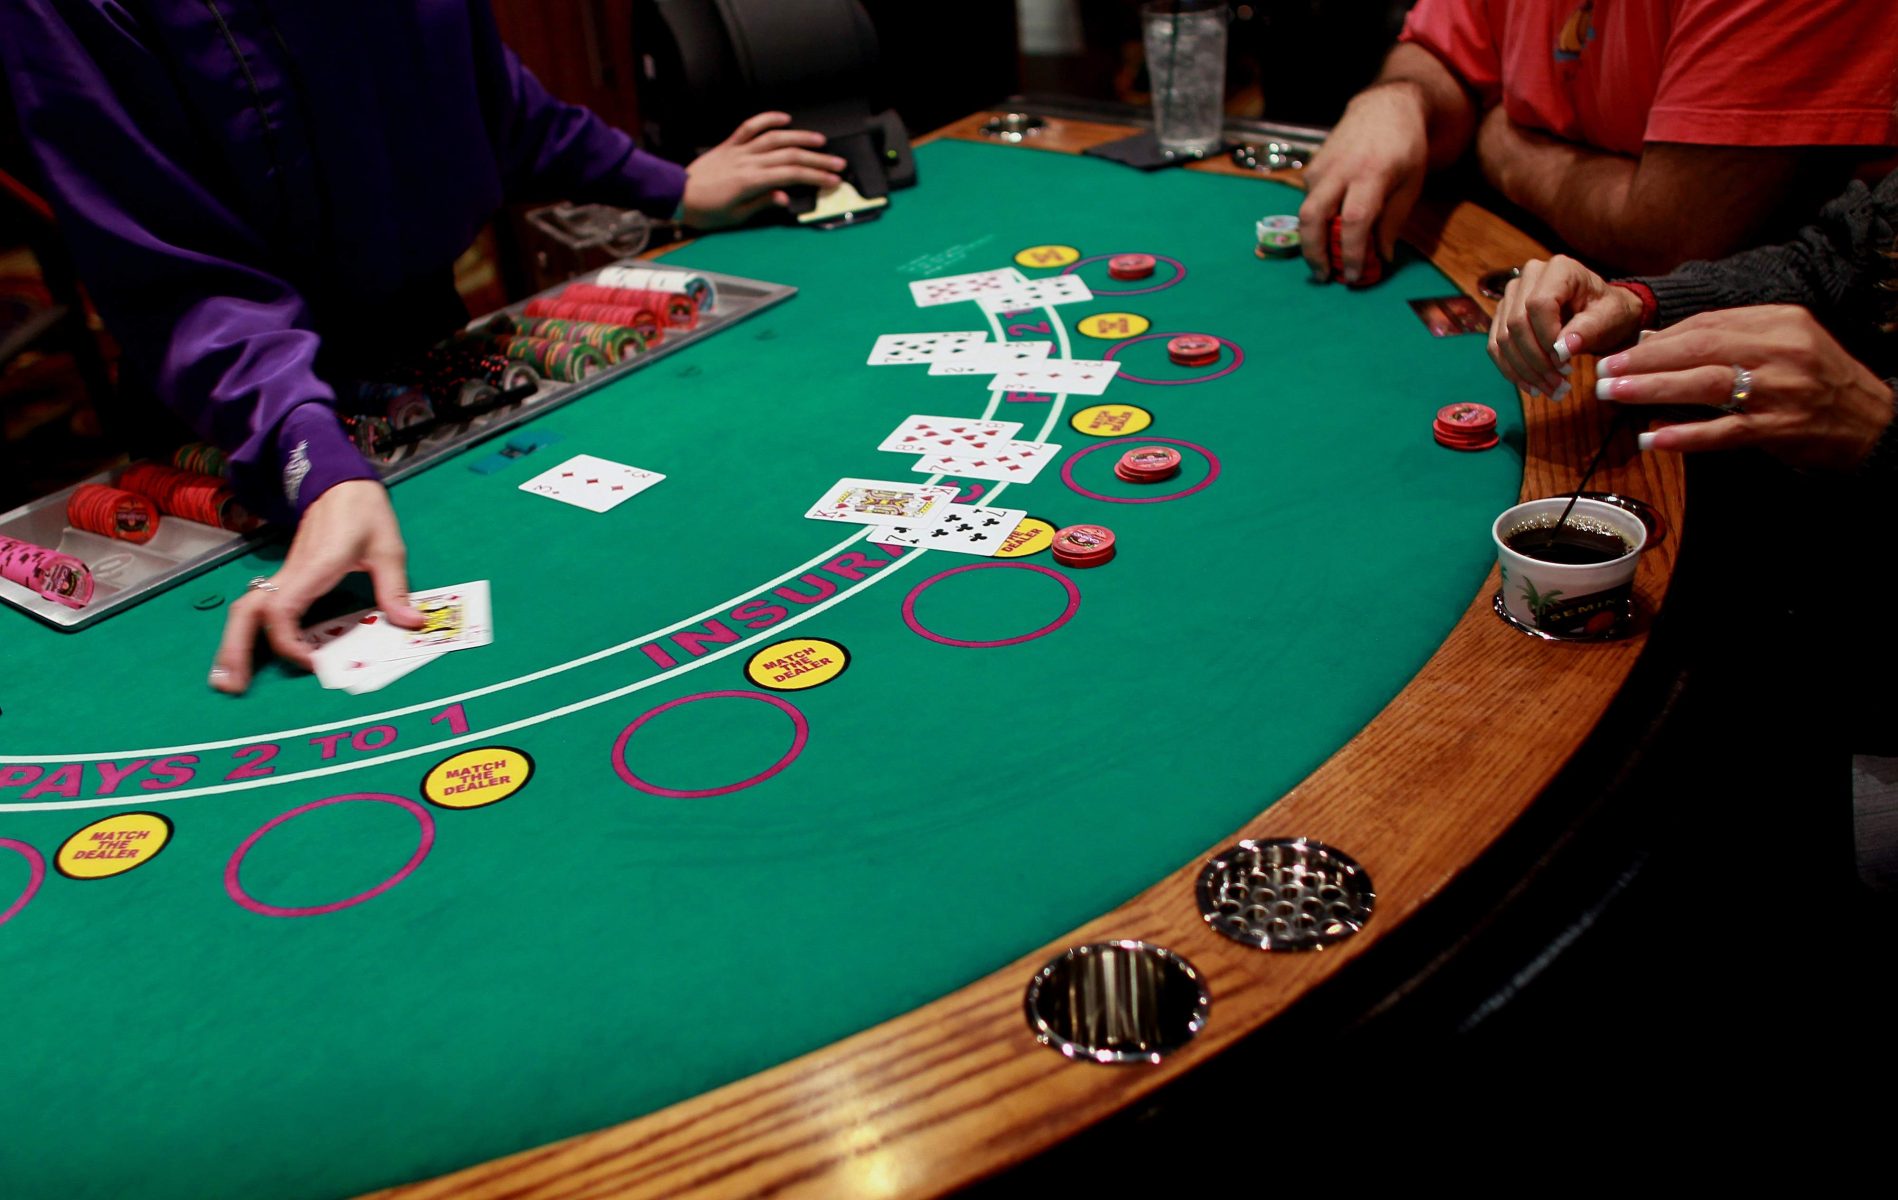 Five Best Tips You Should Follow While Playing Online Casino Games